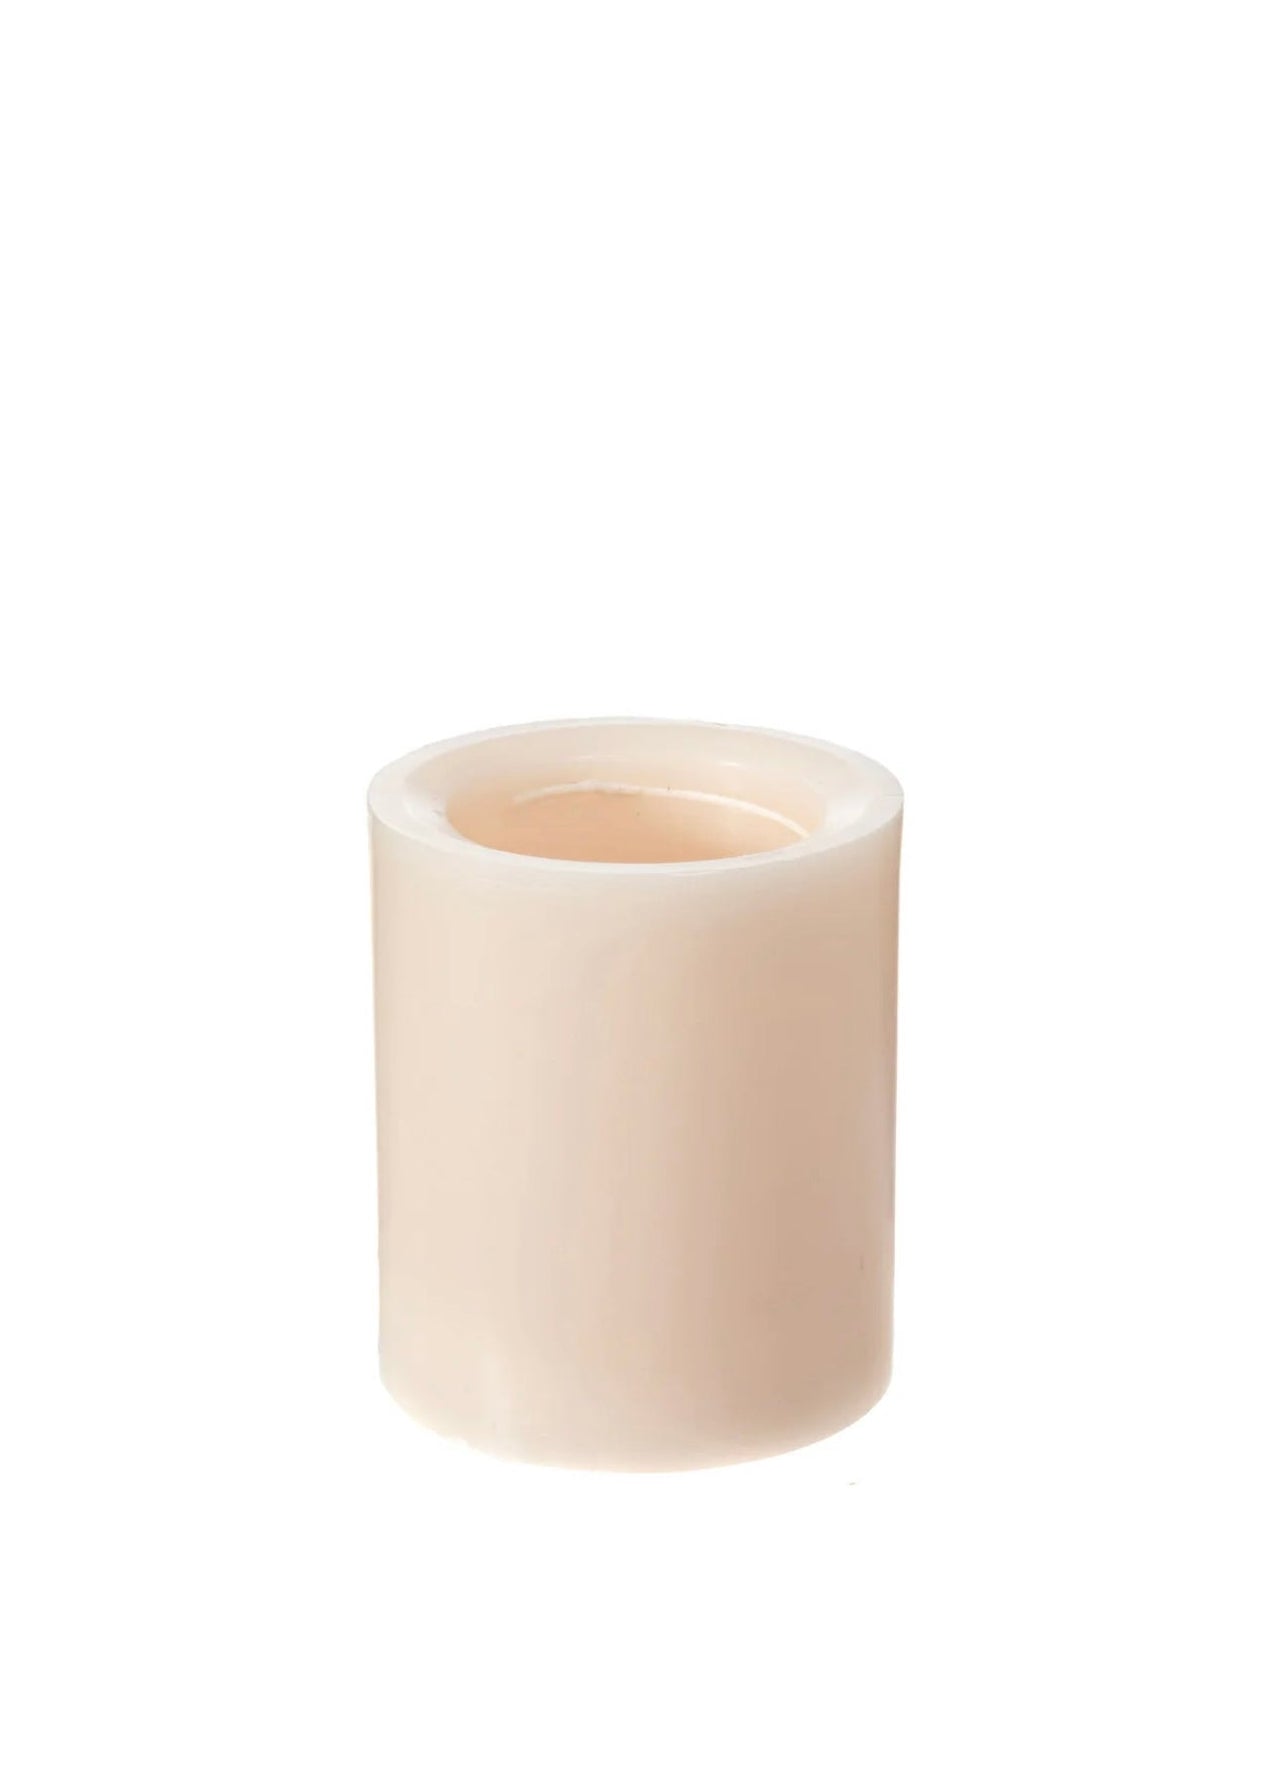 Spiral Light Candles burn AROUND the Candle's Edge! Spiral Light Candle Small 3” w x 3” h / Vanilla+Tobacco